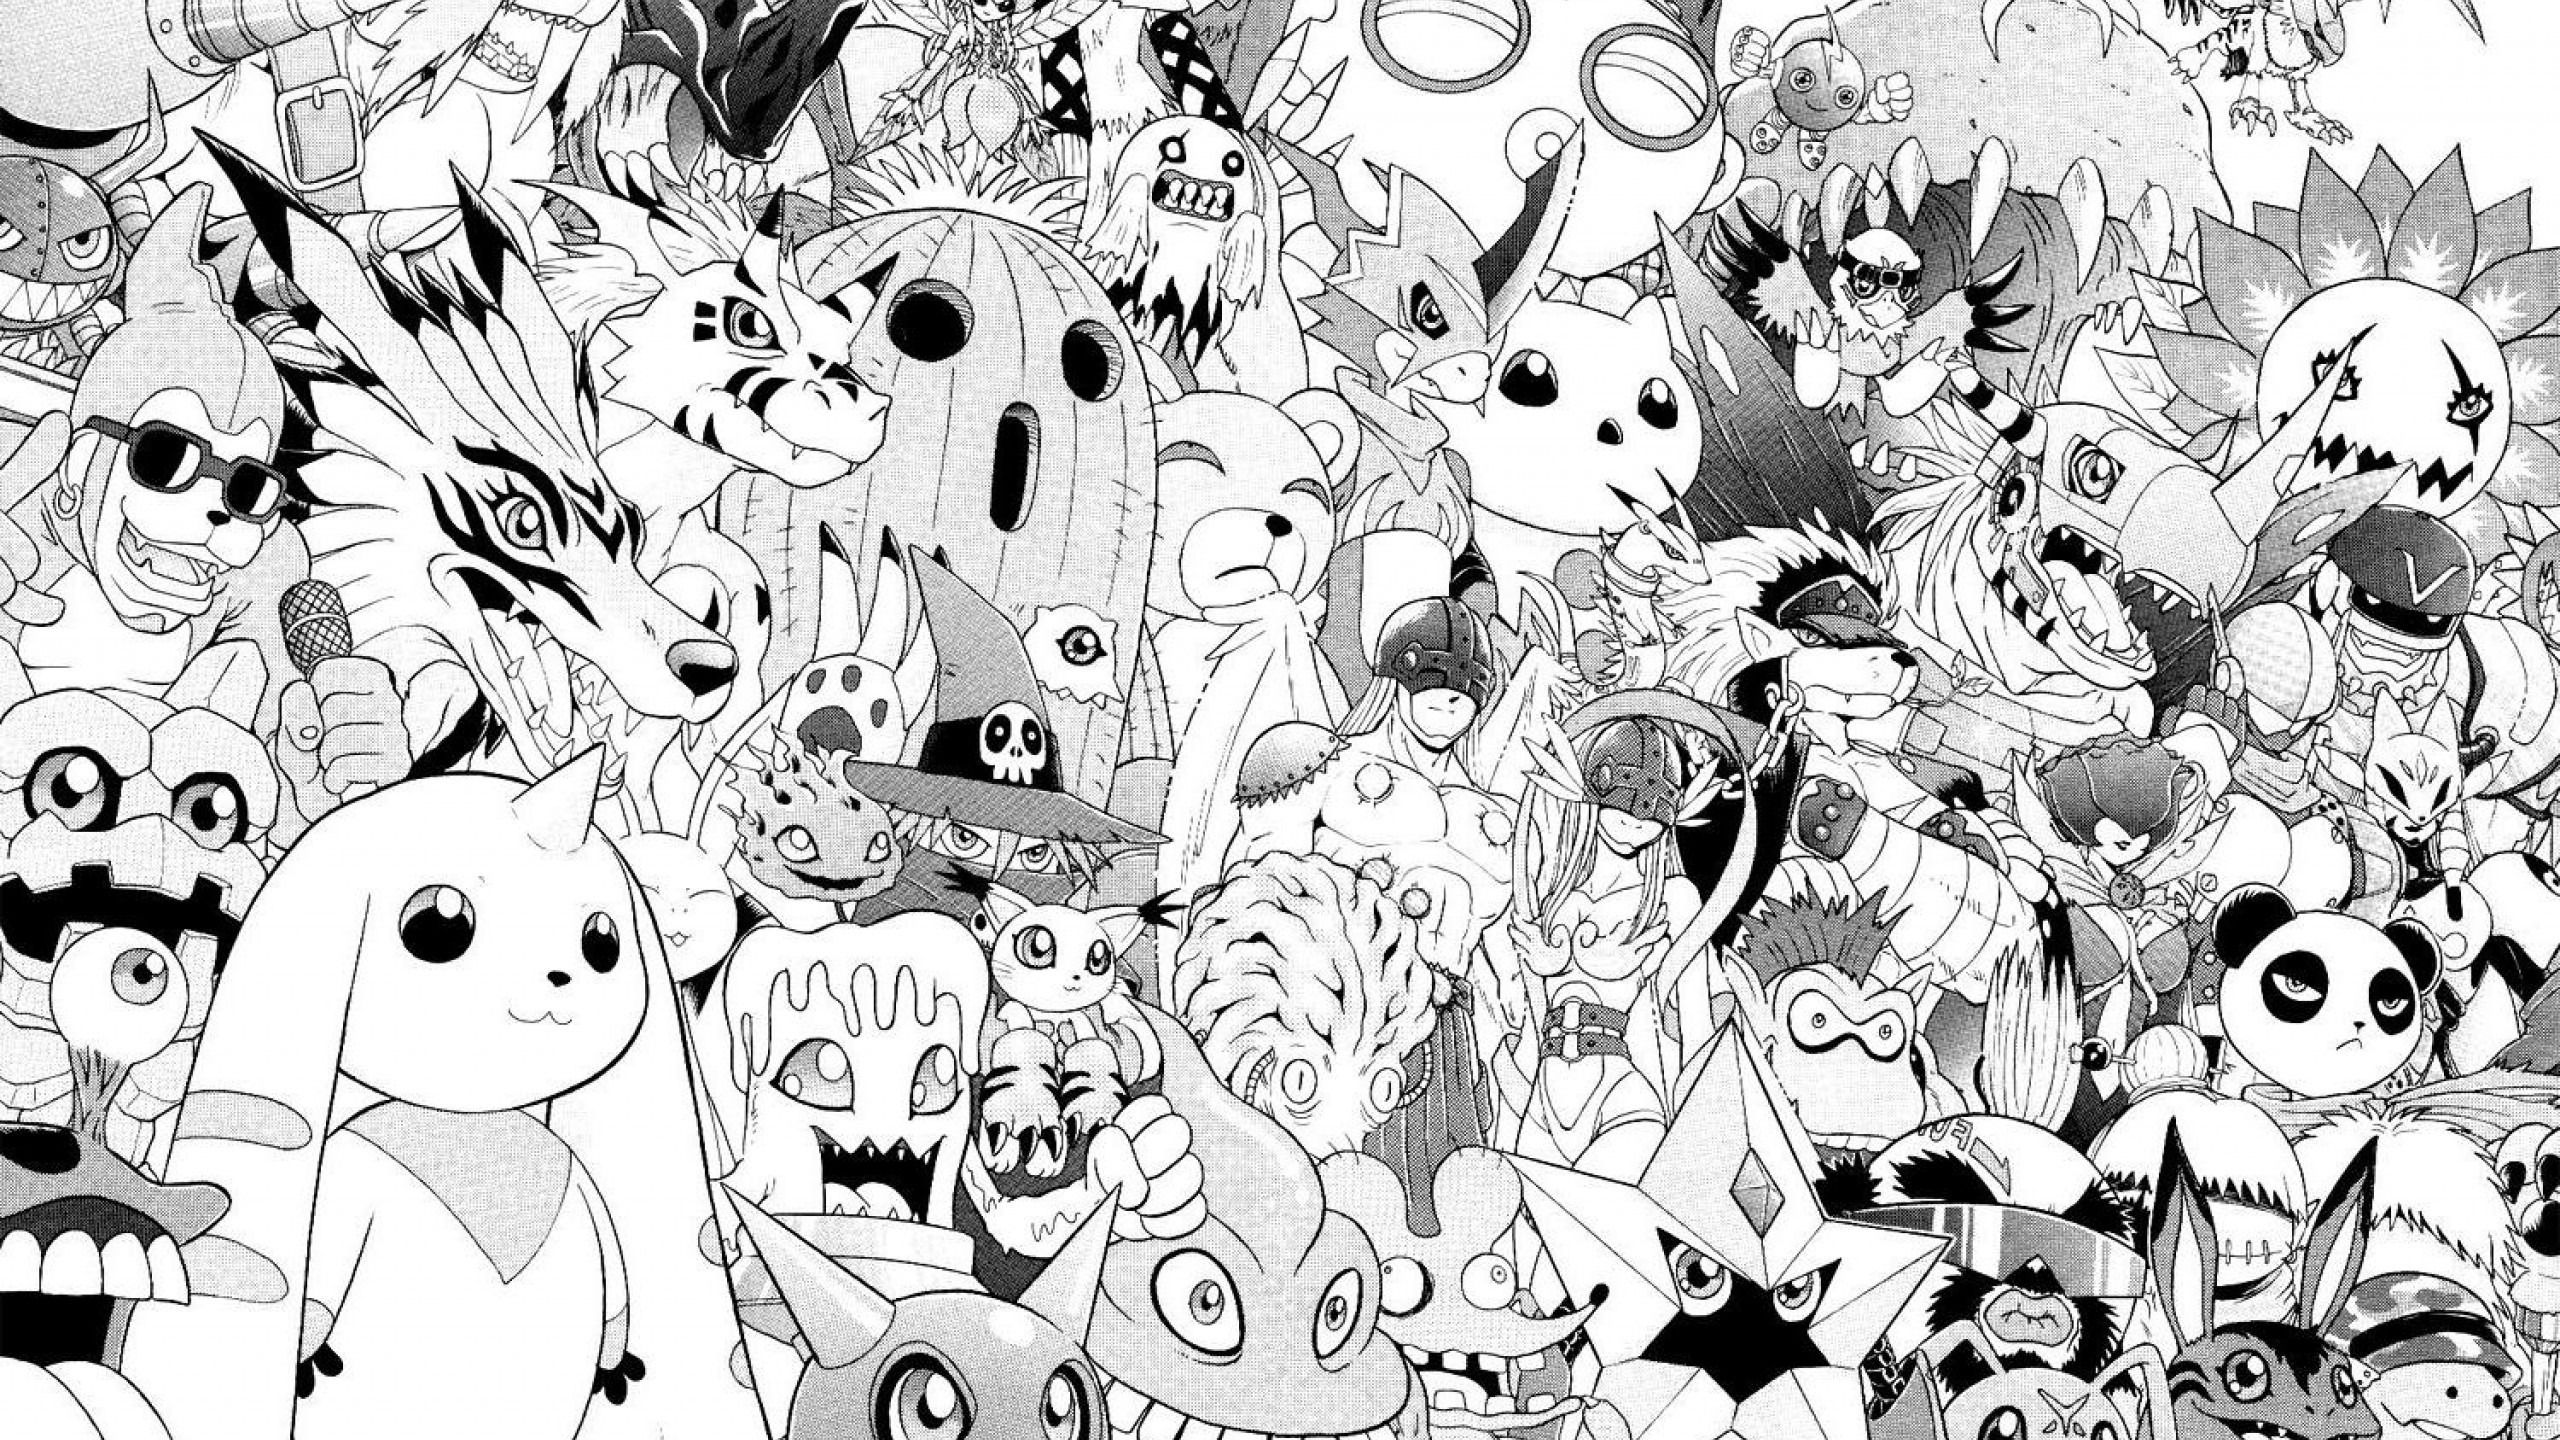 Download wallpaper white, anime, black, wallpaper, manga, characters, old school, digimon, section other in resolution 2560x1440